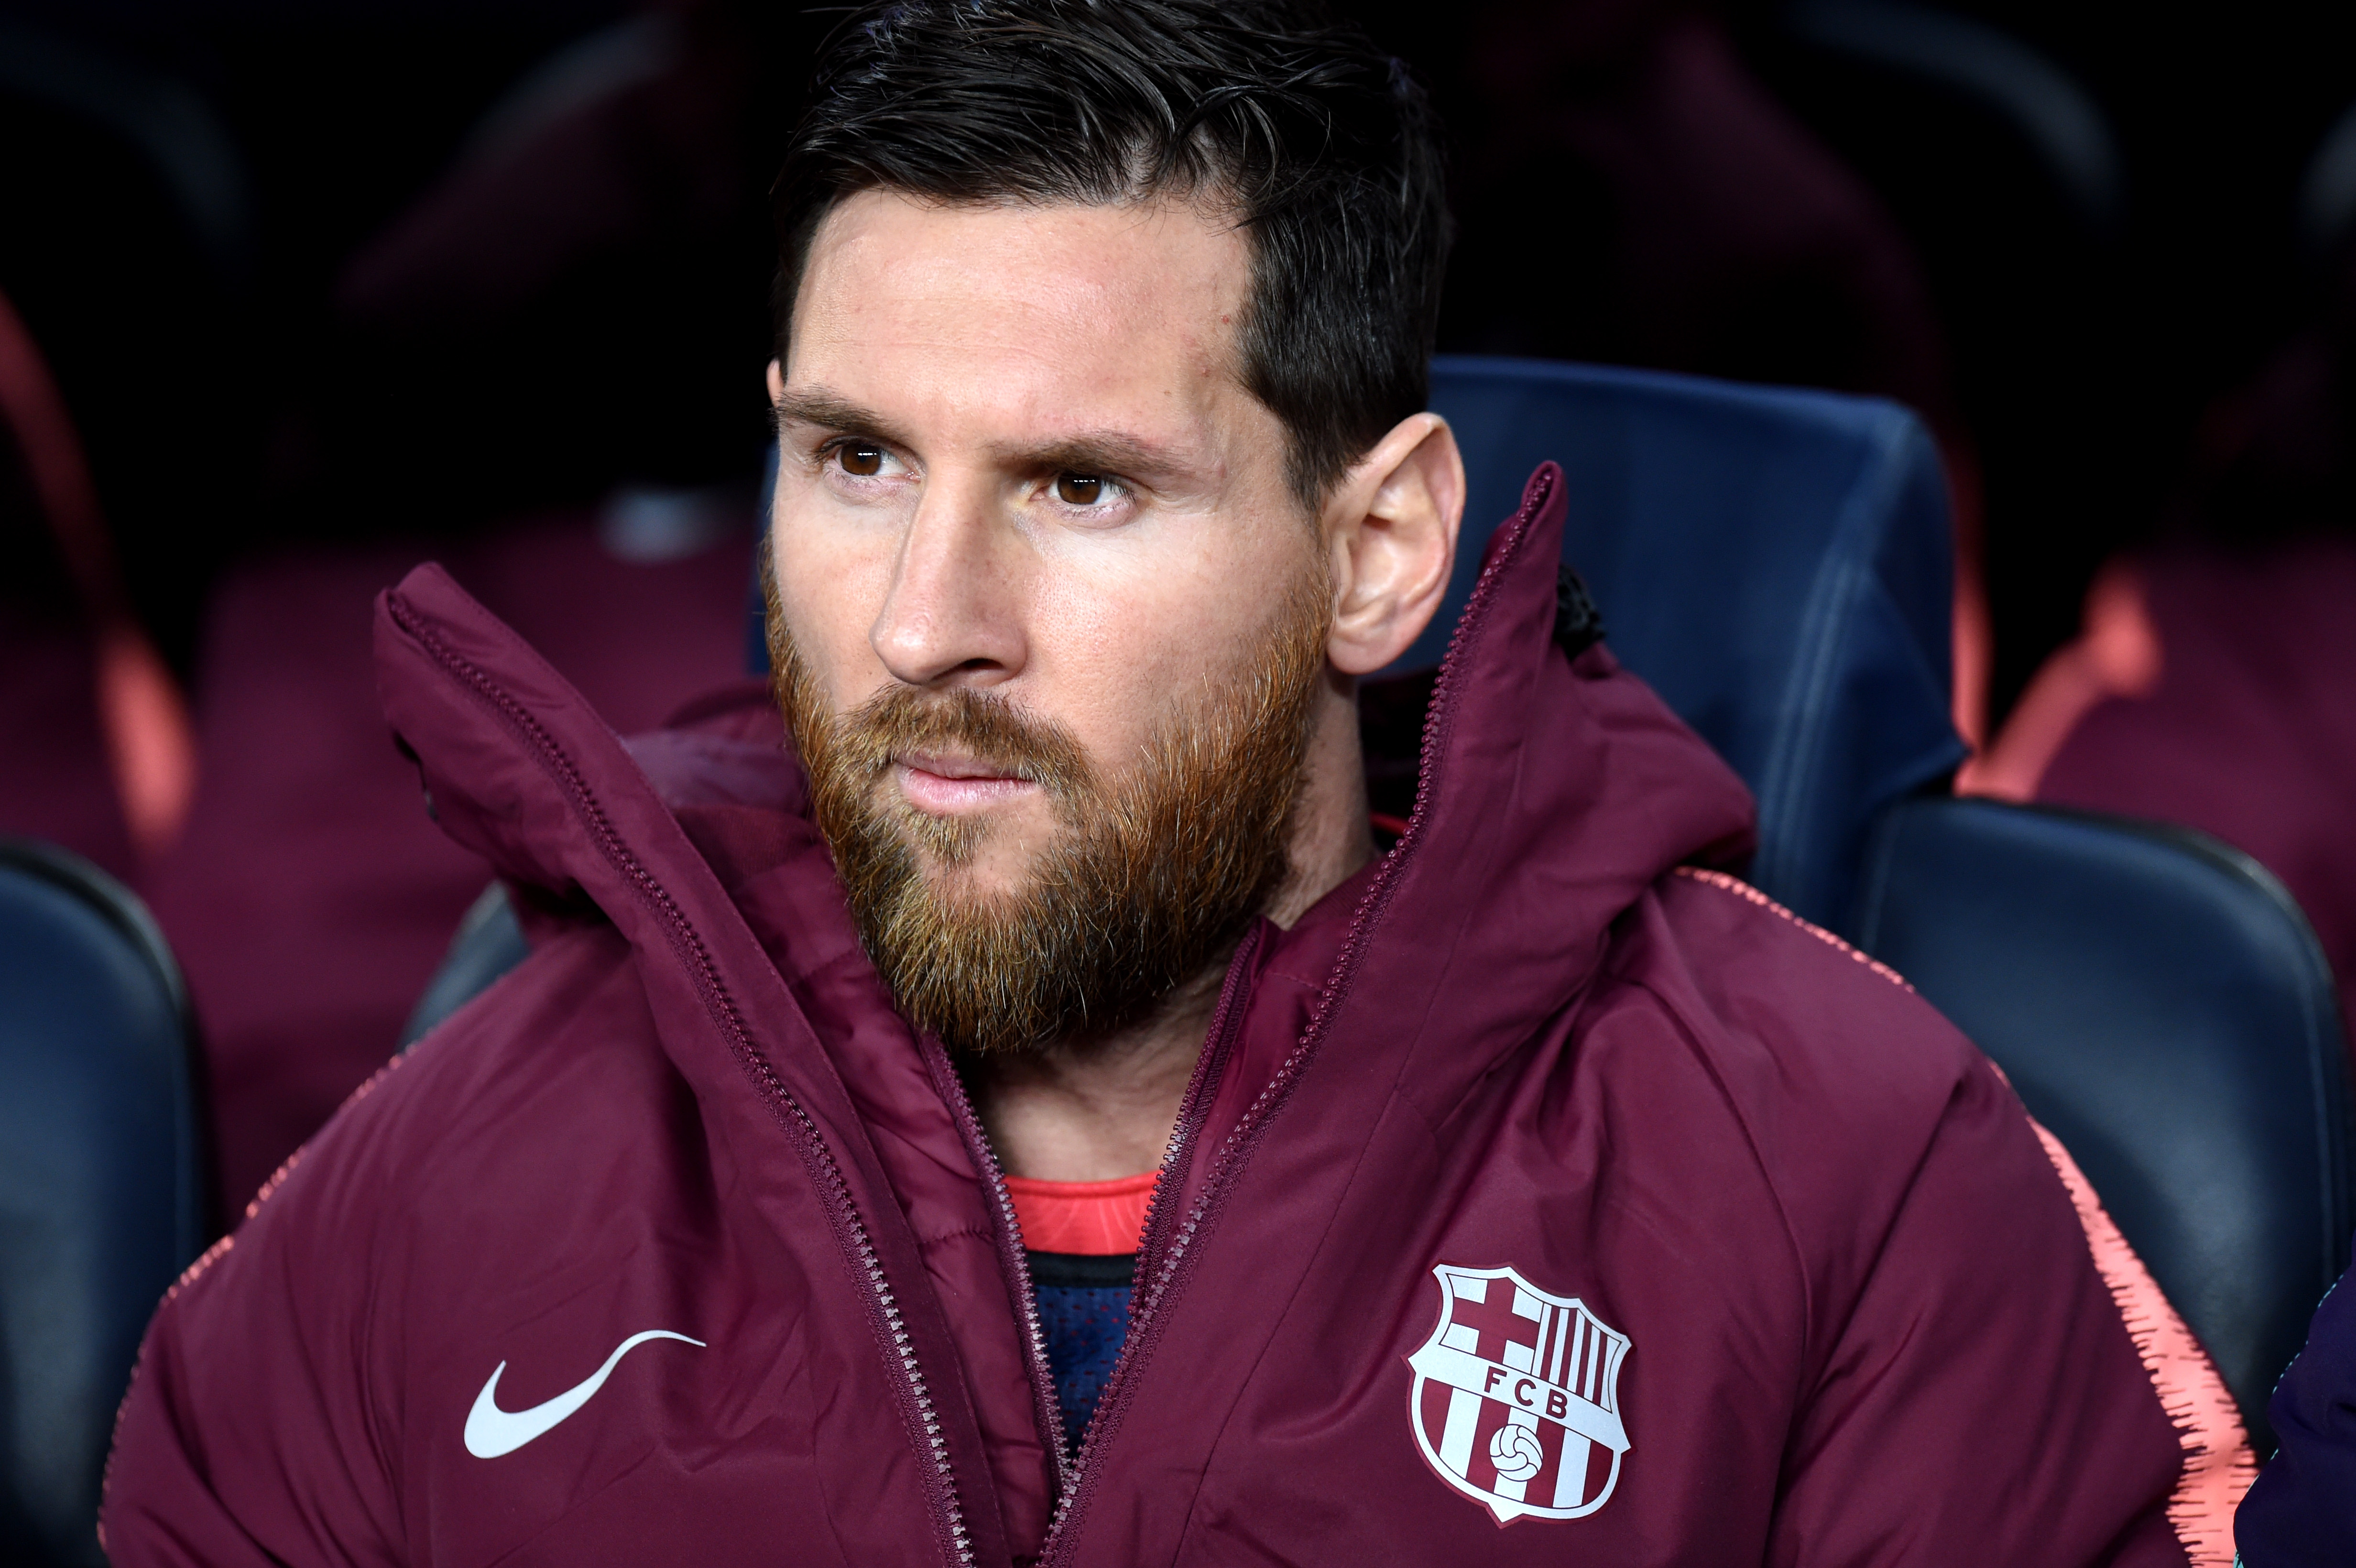 BARCELONA, SPAIN - DECEMBER 11:  Lionel Messi of Barcelona sits on the bench prior to the UEFA Champions League Group B match between FC Barcelona and Tottenham Hotspur at Camp Nou on December 11, 2018 in Barcelona, Spain.  (Photo by Alex Caparros/Getty Images)